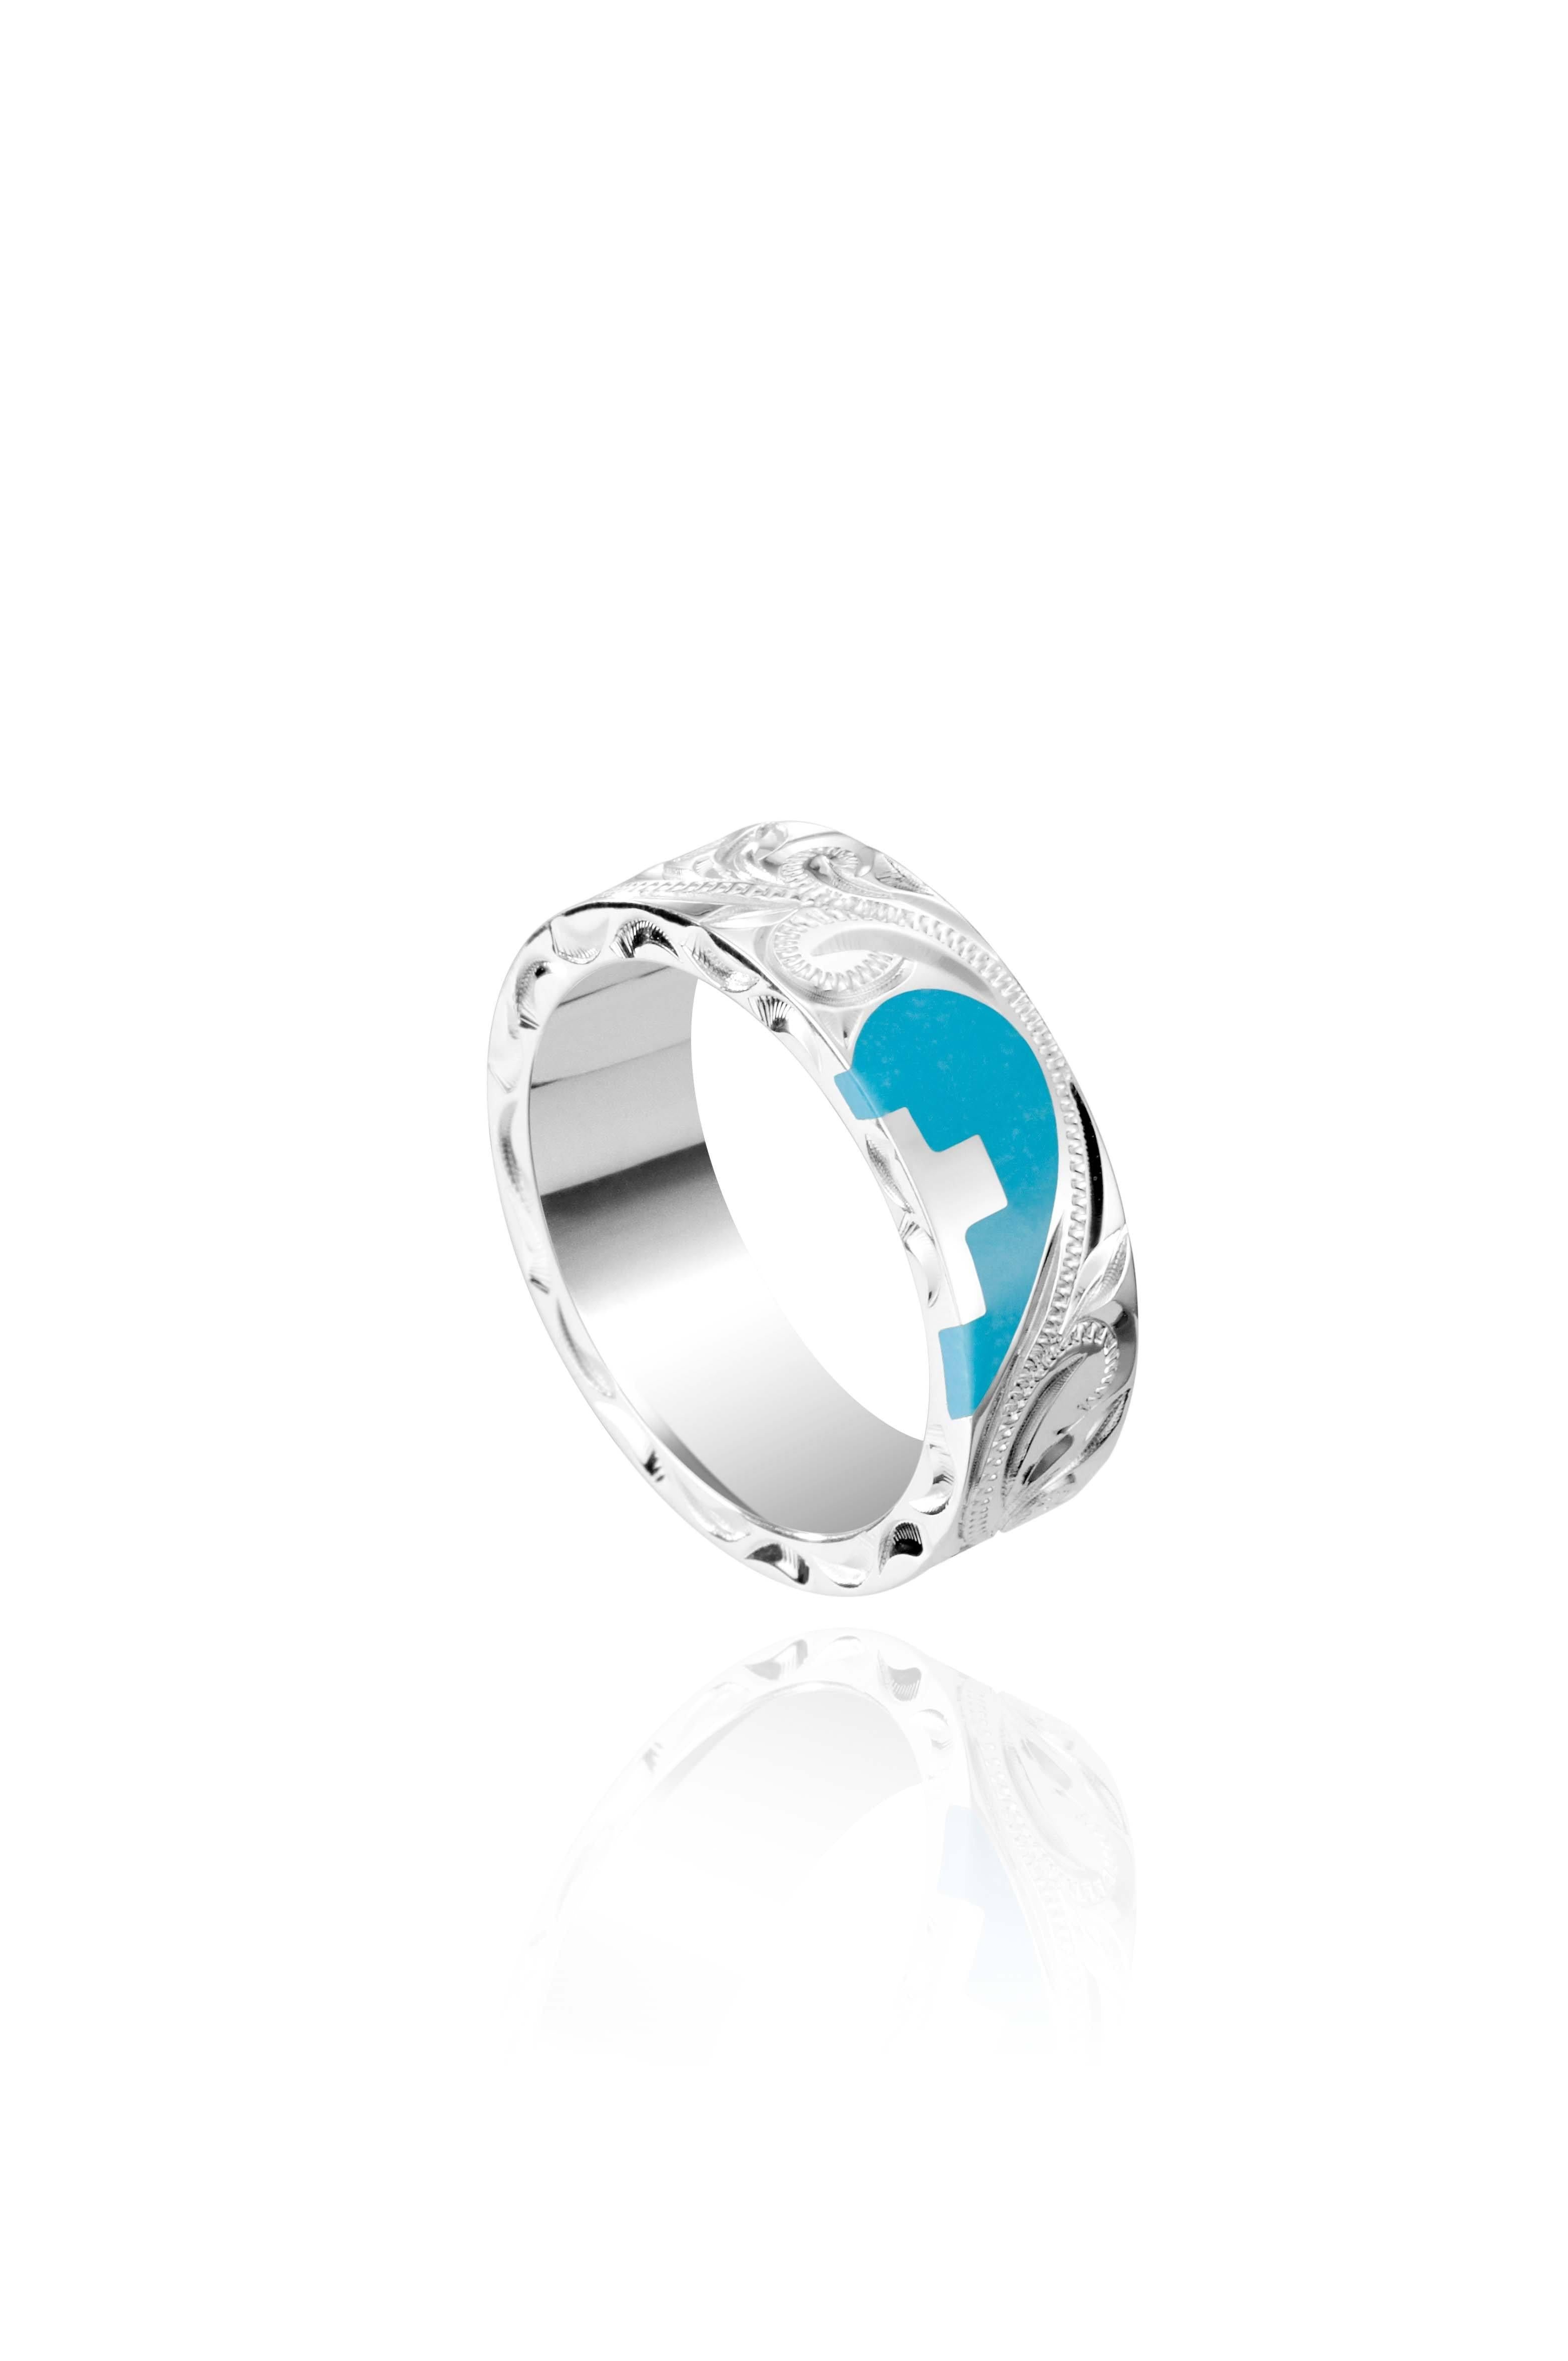 The picture shows a 925 sterling silver and turquoise heart with a cross matching ring with hand engravings.